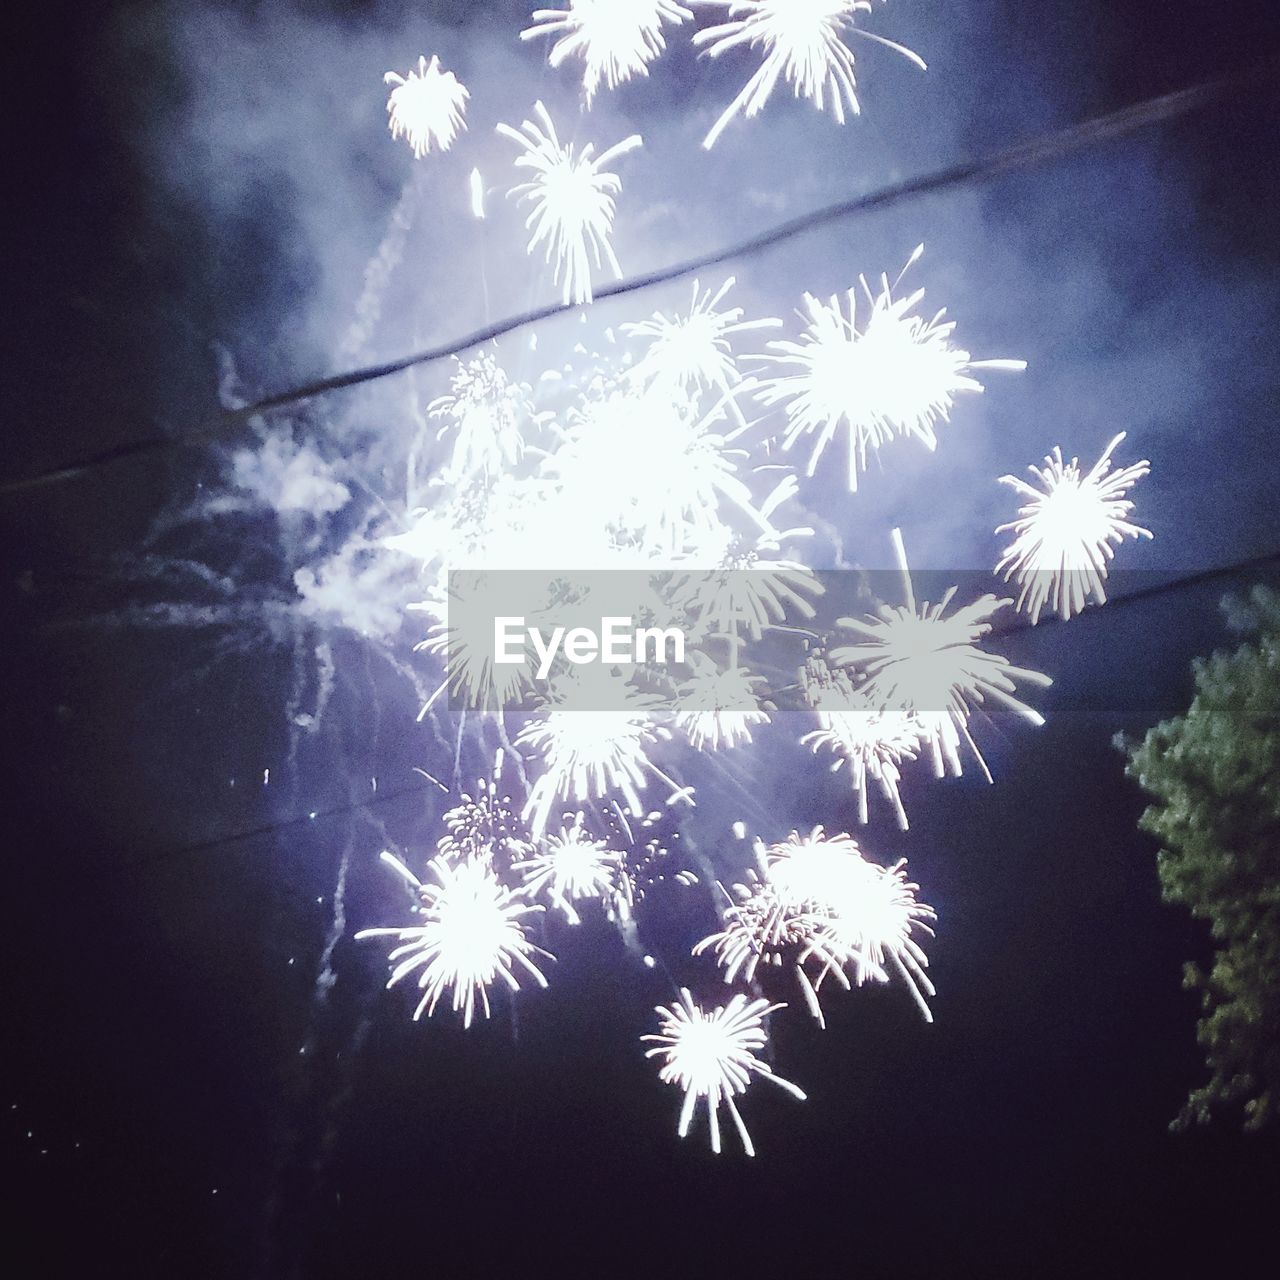 LOW ANGLE VIEW OF FIREWORK DISPLAY IN SKY